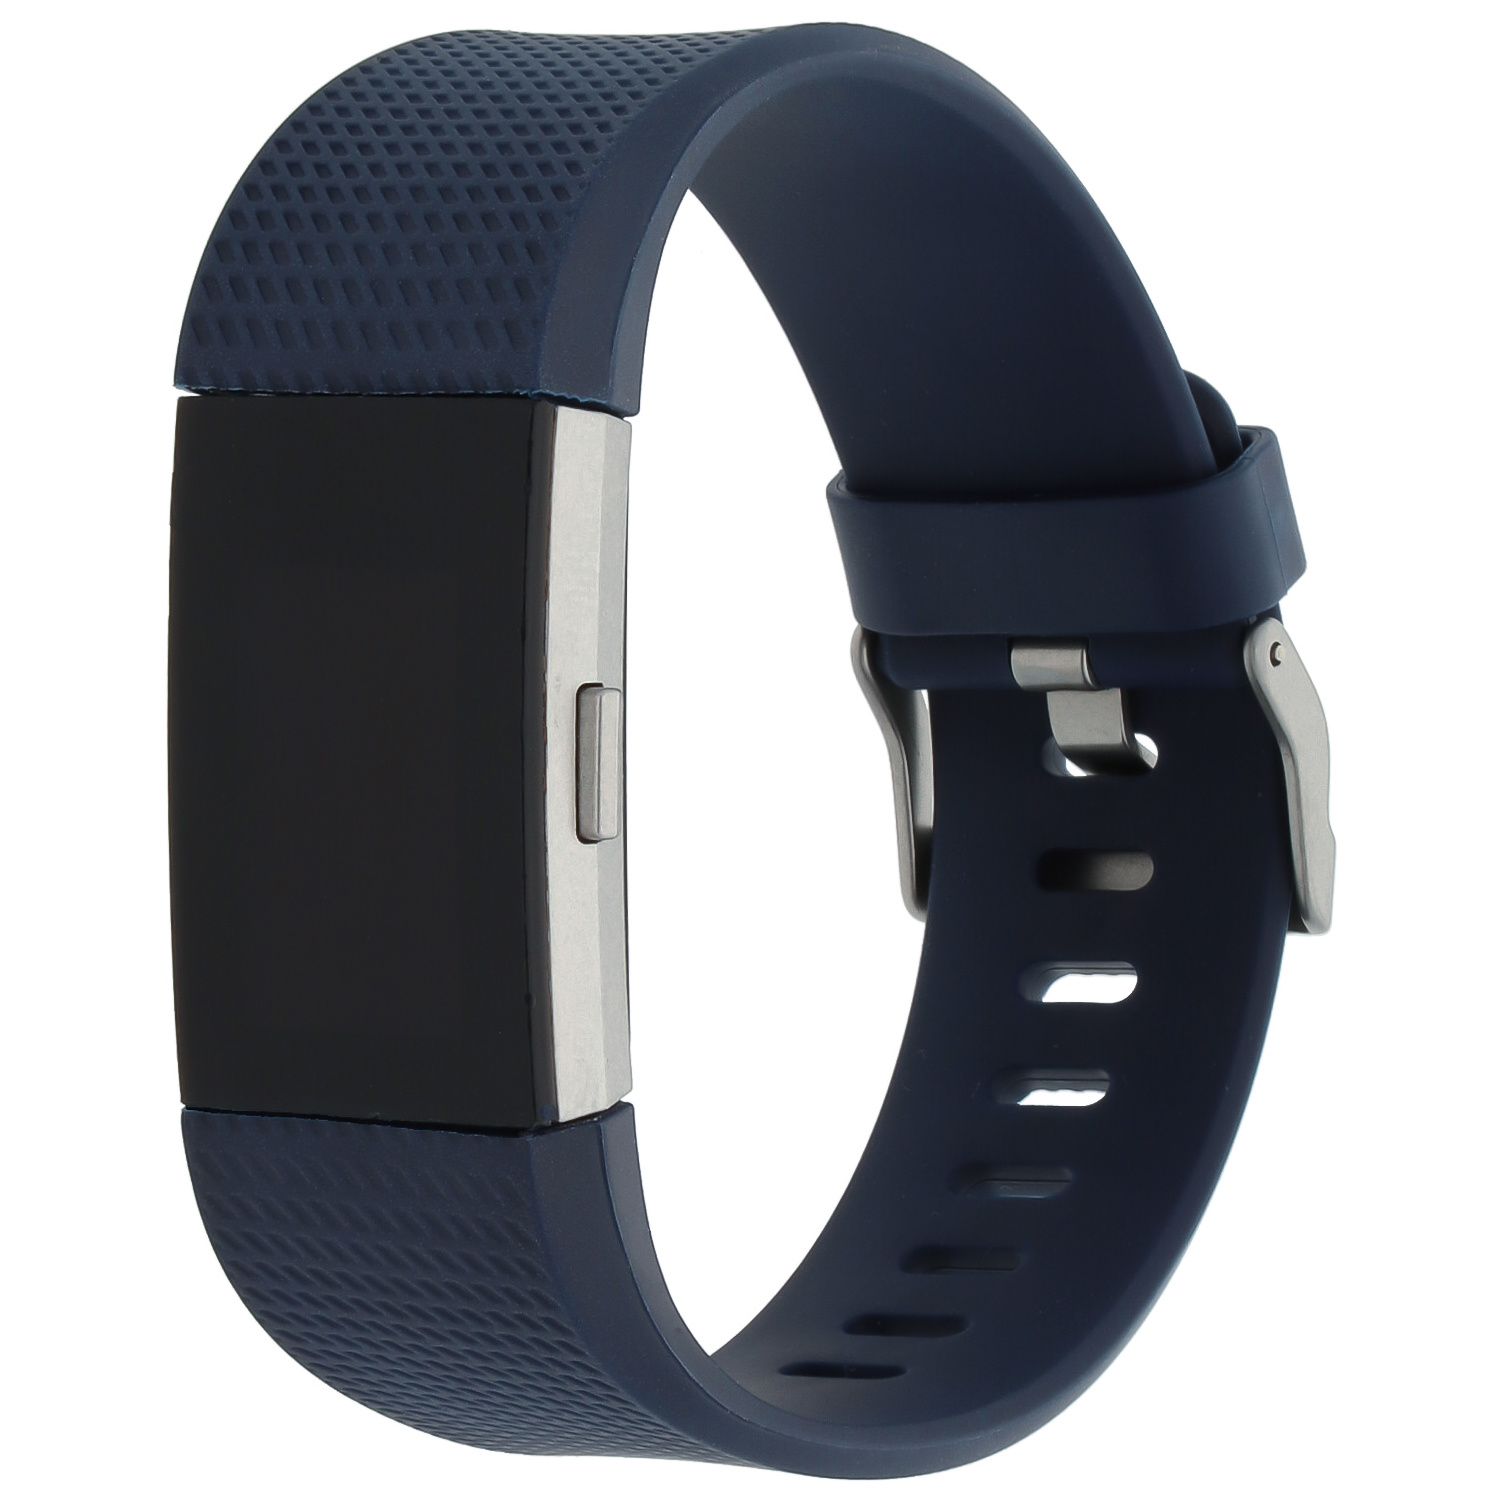 Fitbit Charge 2 sport band - middernacht blauw